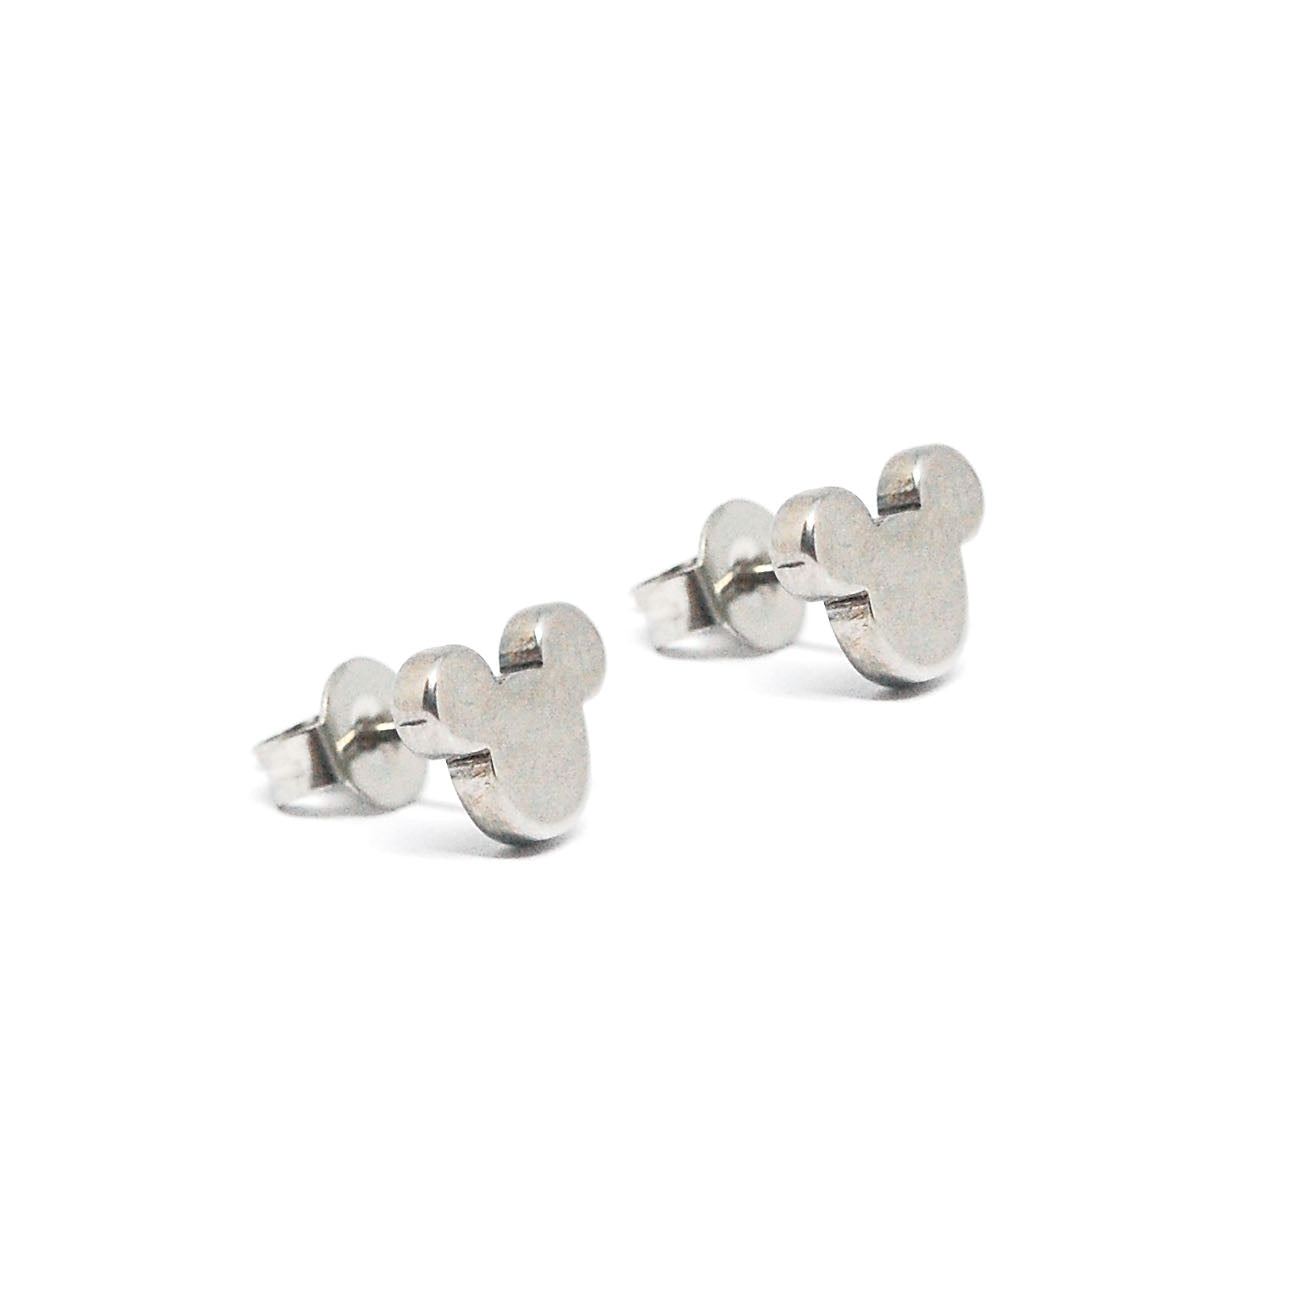 ESE 4939: Mickey Mouse Studs Earrings